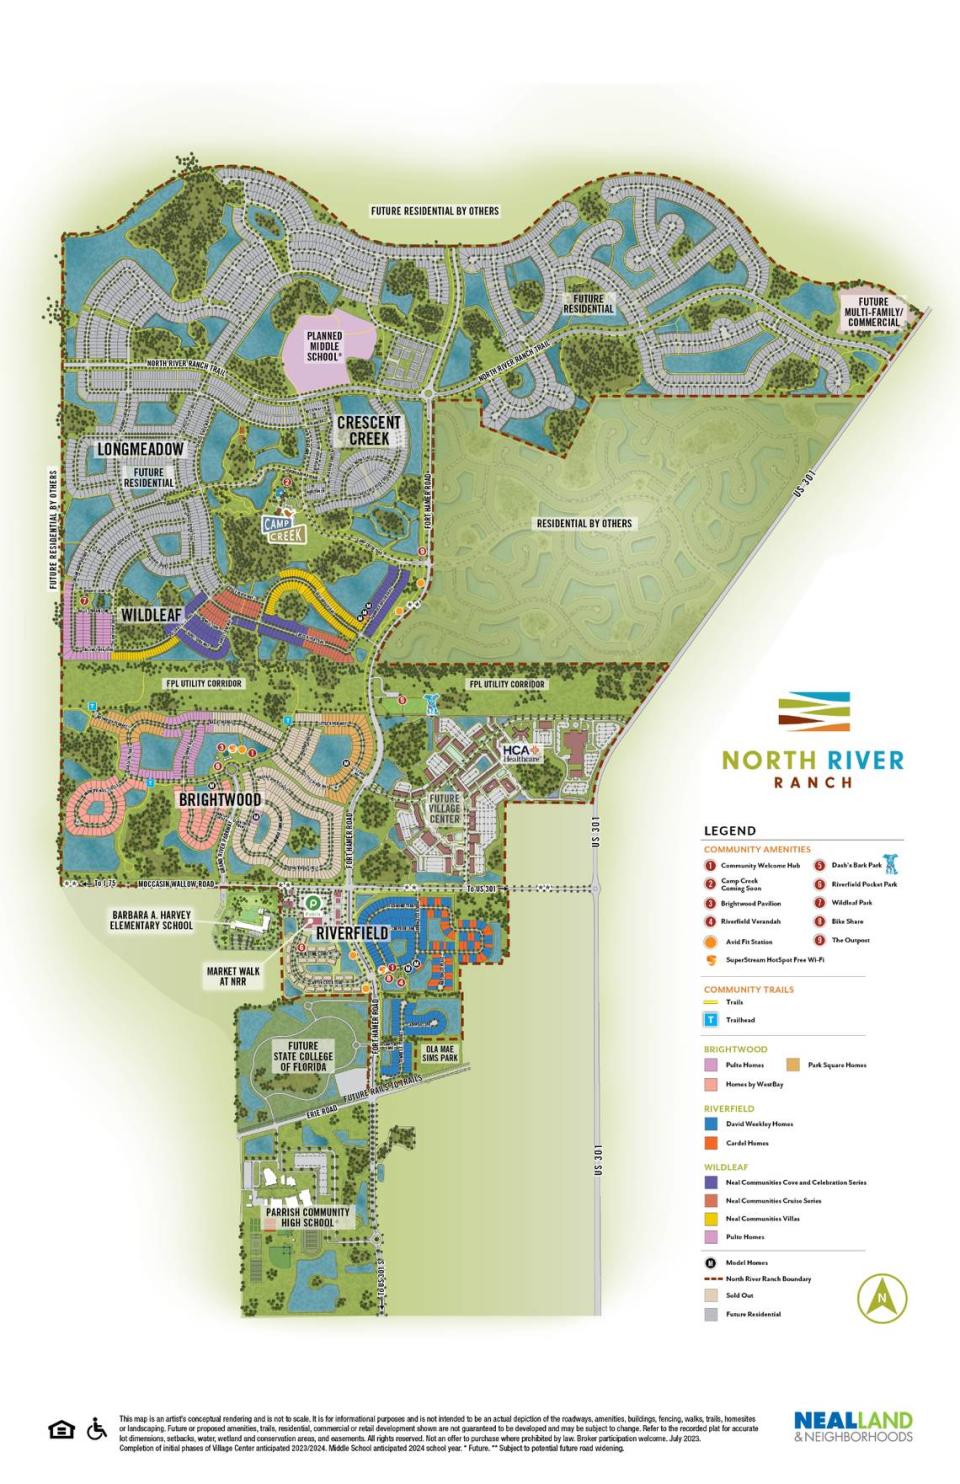 The site plan shows where HCA Florida North River Ranch Emergency center would be located in the North River Ranch community..